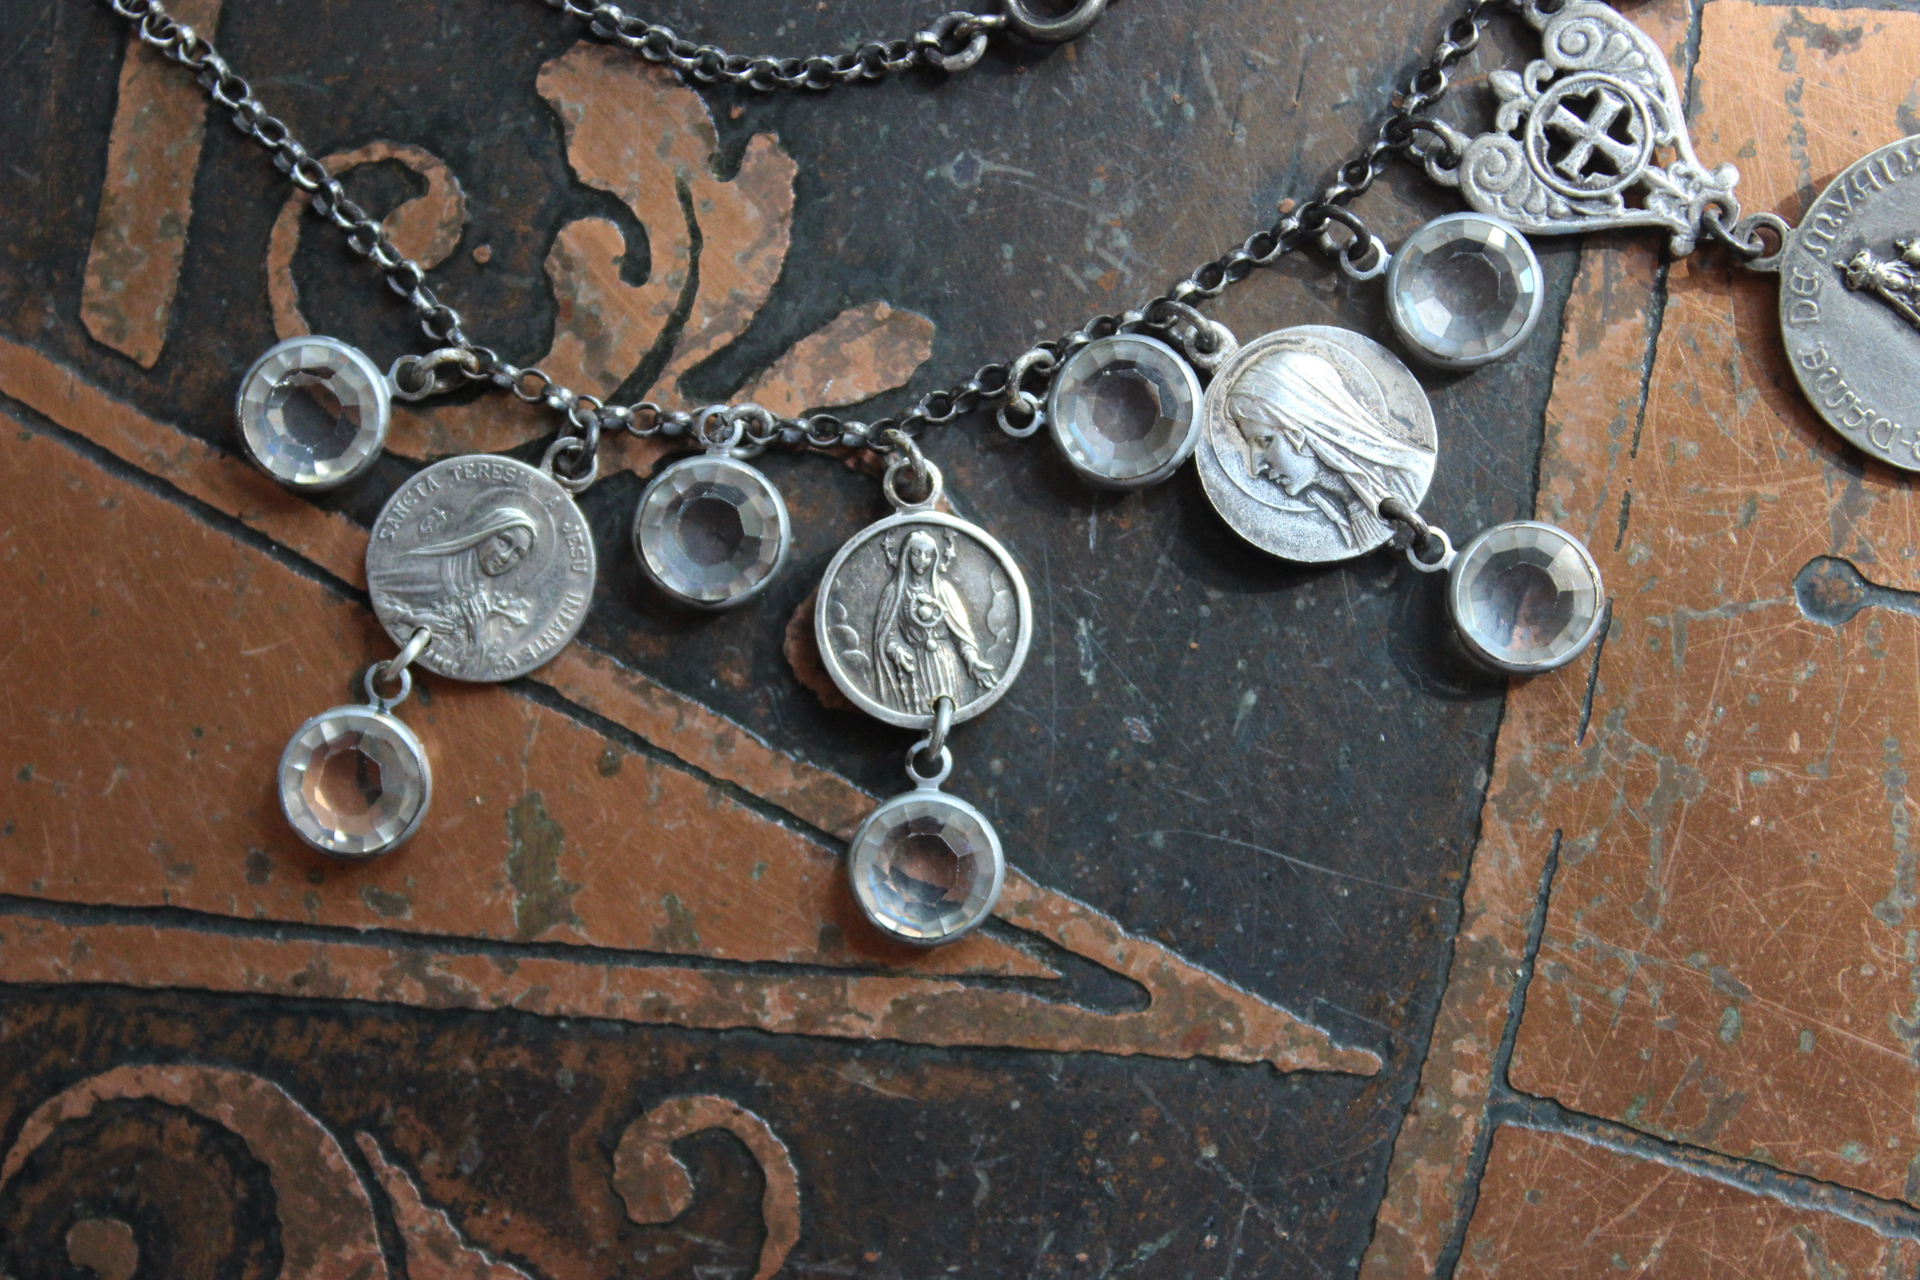 Rare Antique French Our Lady of Myans Necklace with Multiple Antique French Medals,Sterling Cross Connector, Faceted Crystal Drops and Sterling Chain